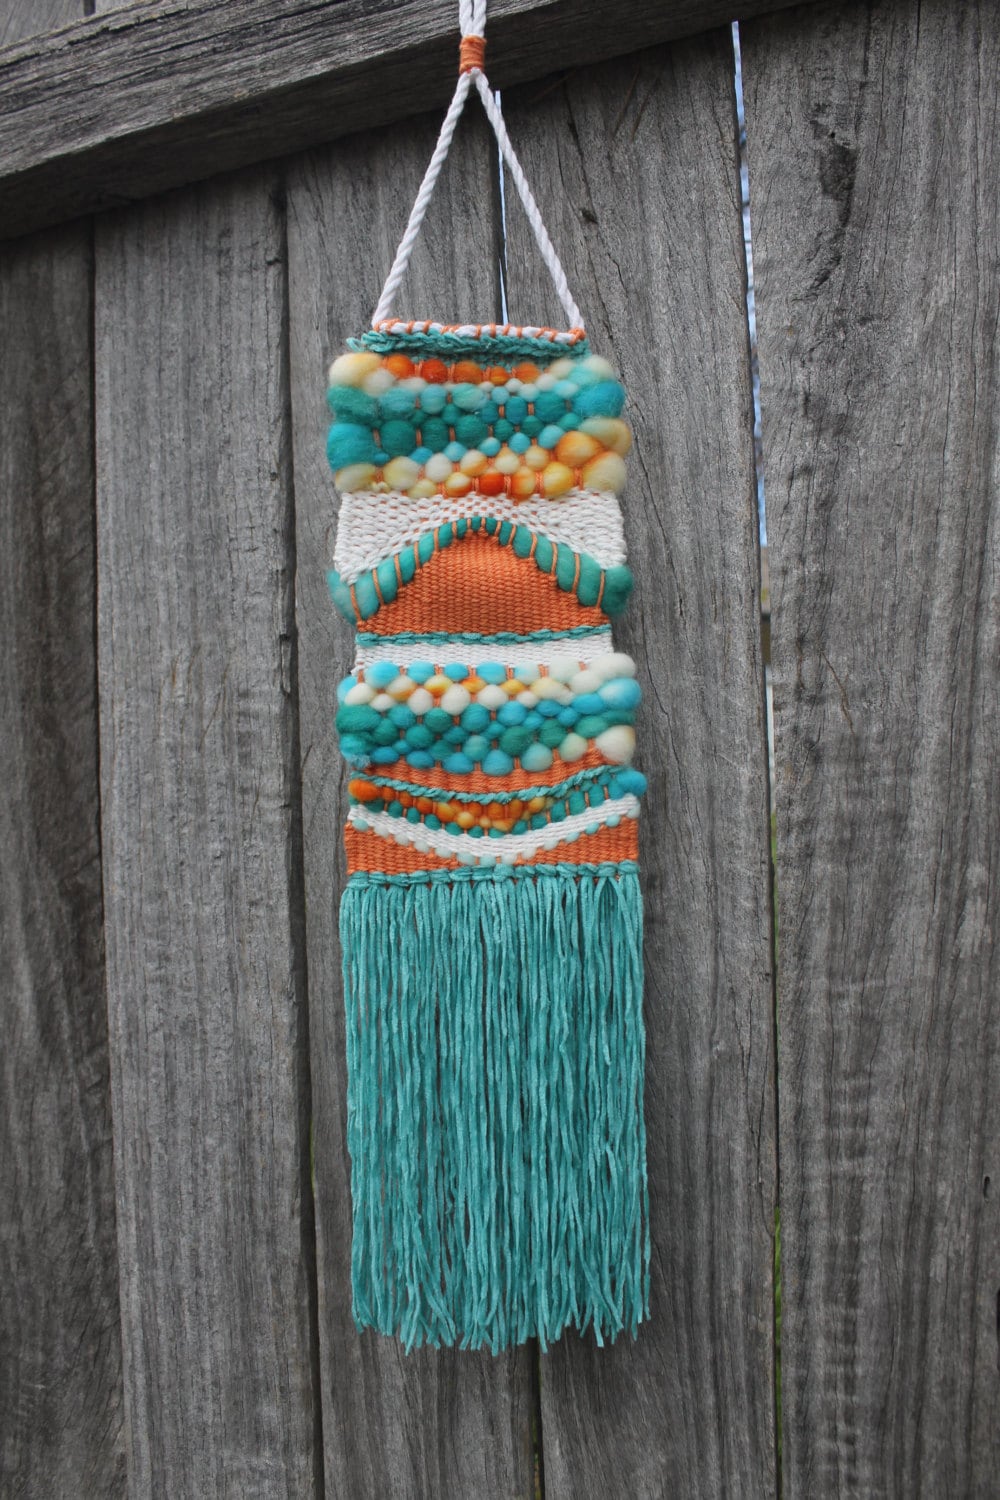 Woven Art Wall Hanging by AdaOliveCreations on Etsy